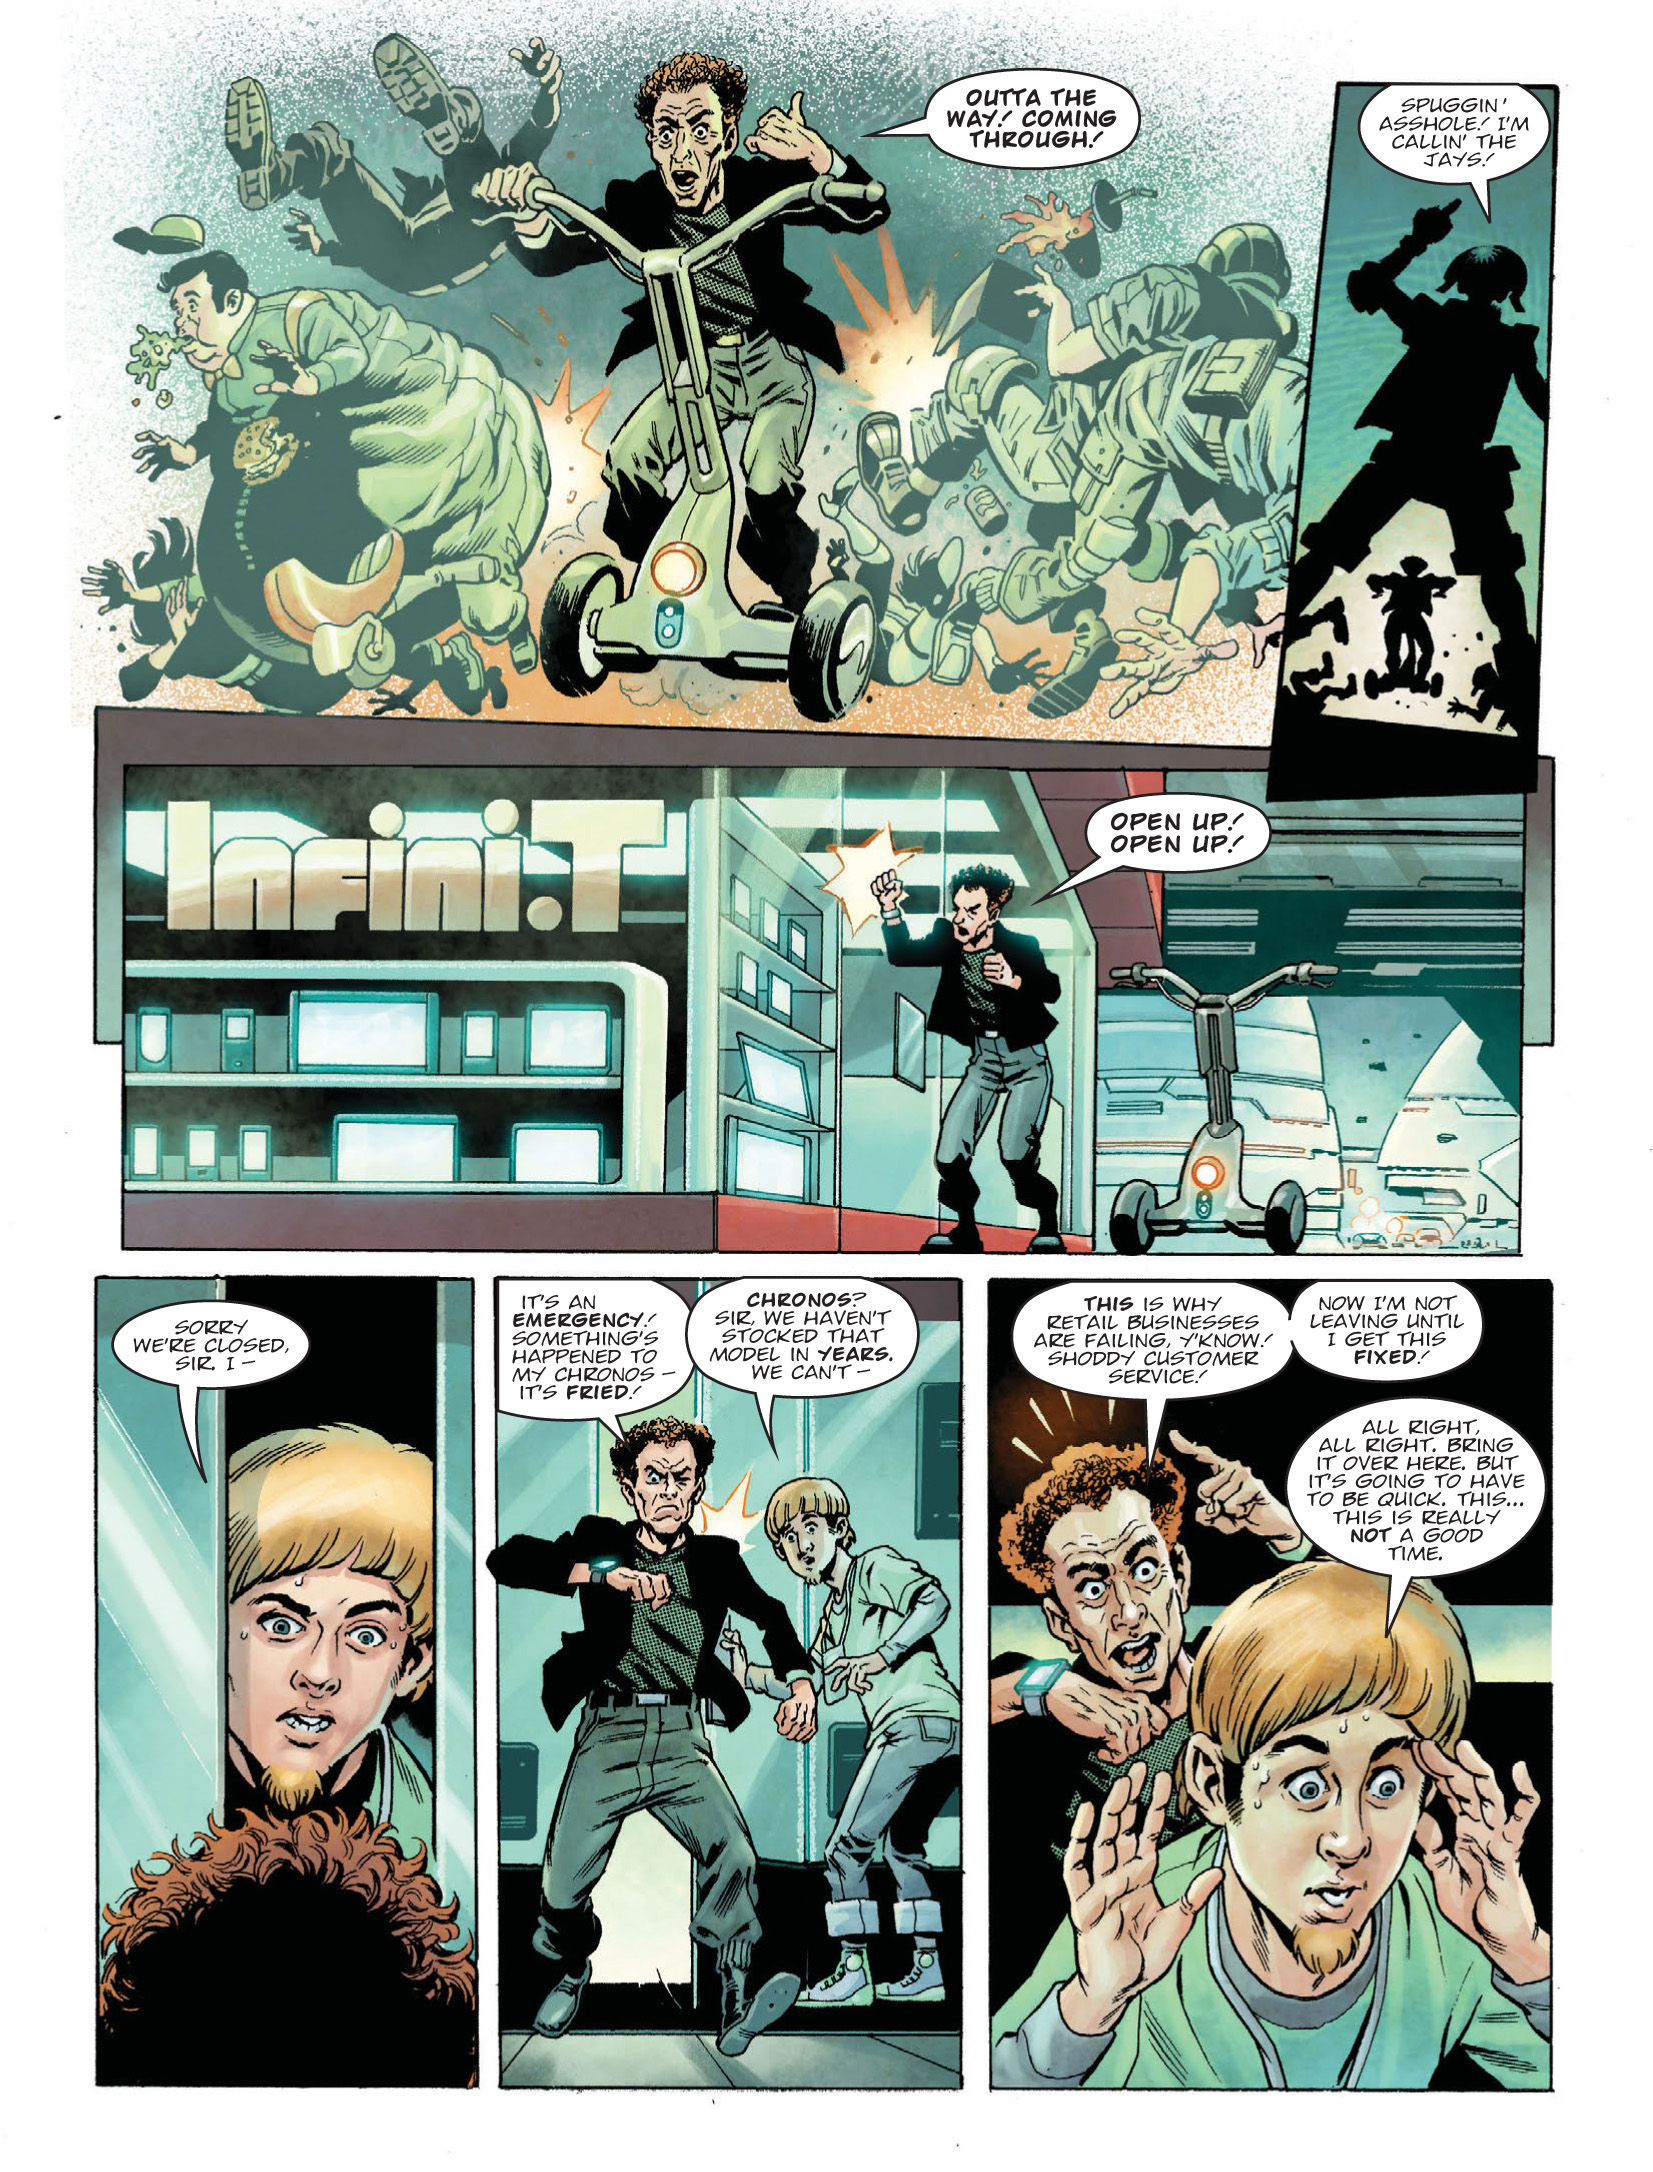 2000 AD: Chapter 2075 - Page 4